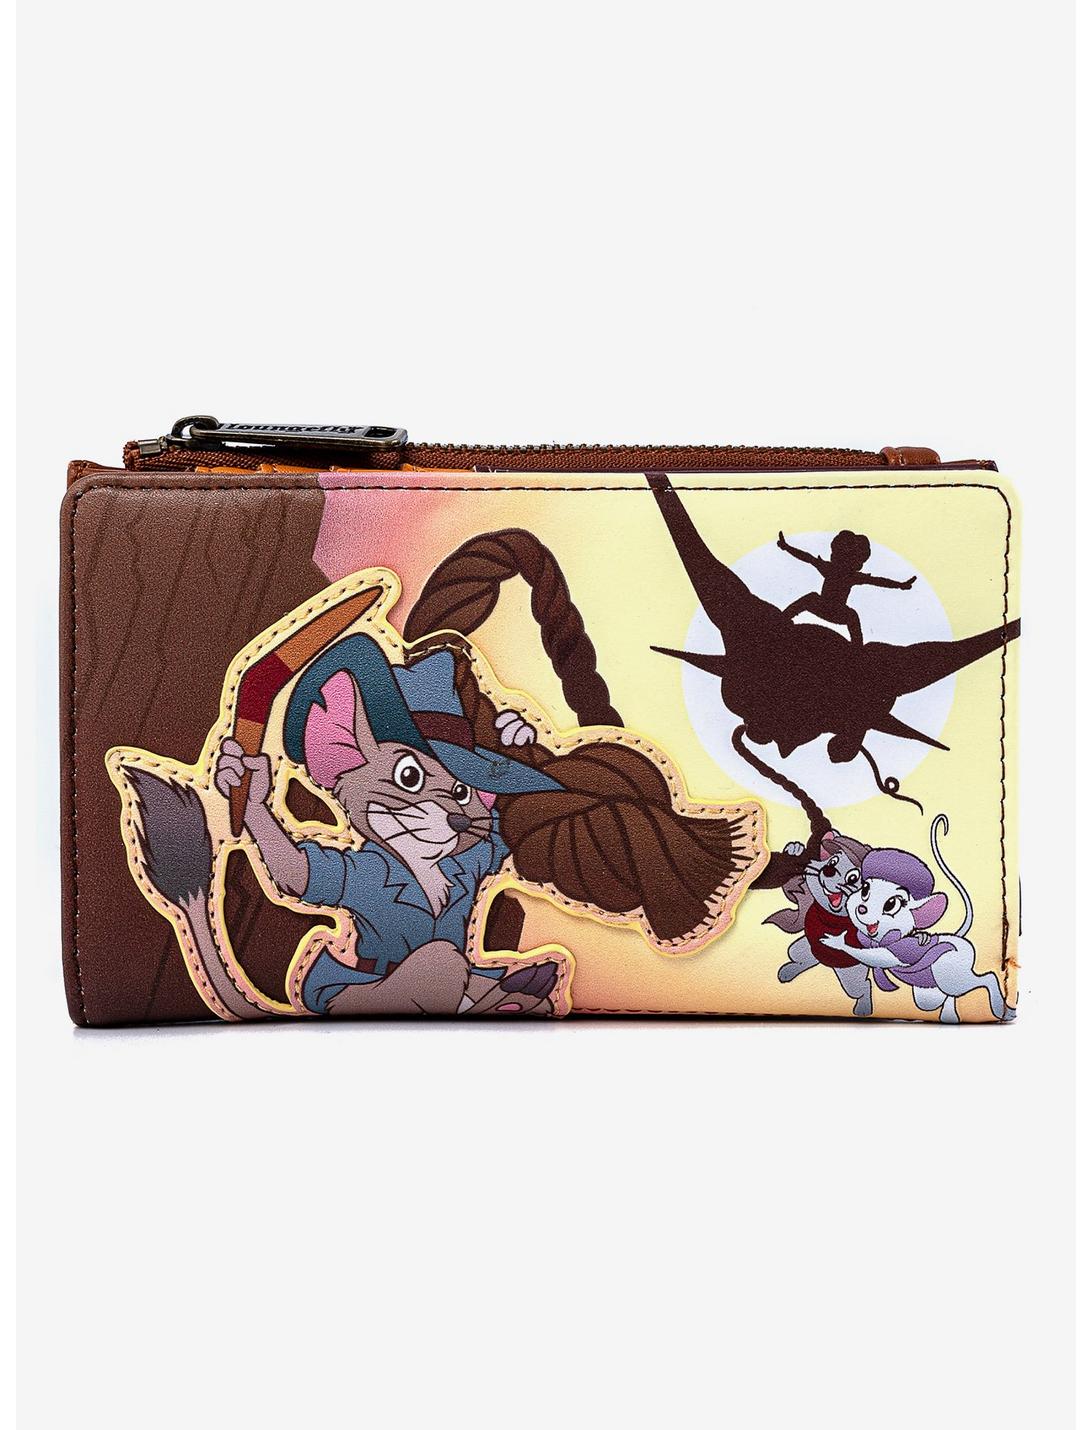 Loungefly Disney The Rescuers Canyon Wallet, , hi-res